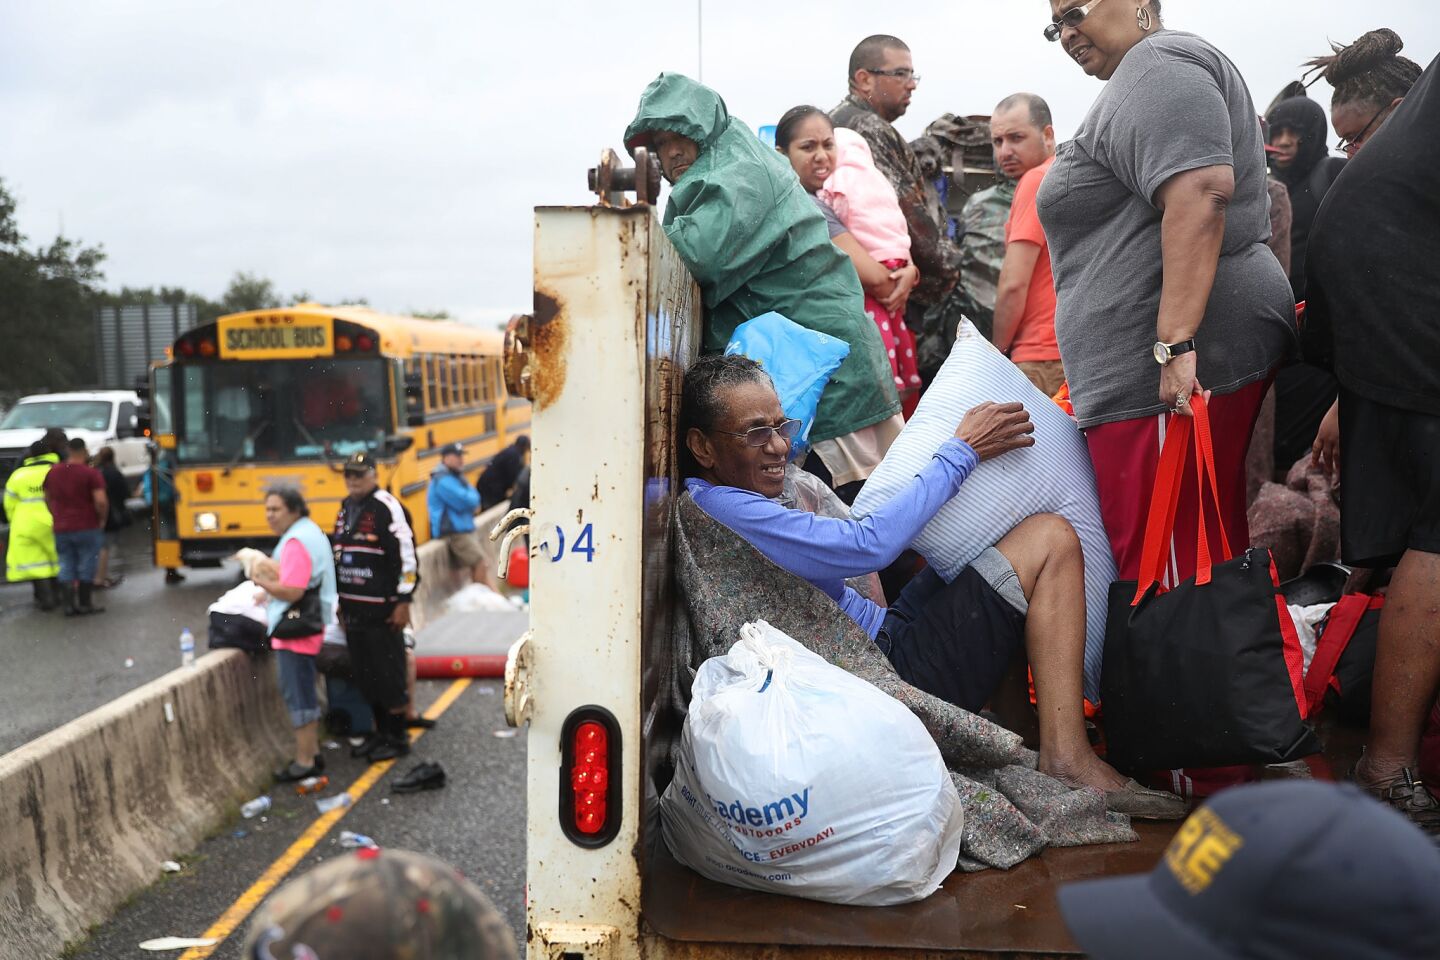 Evacuees ride on a truck after they were driven from their homes by the flooding in Port Arthur, Texas.